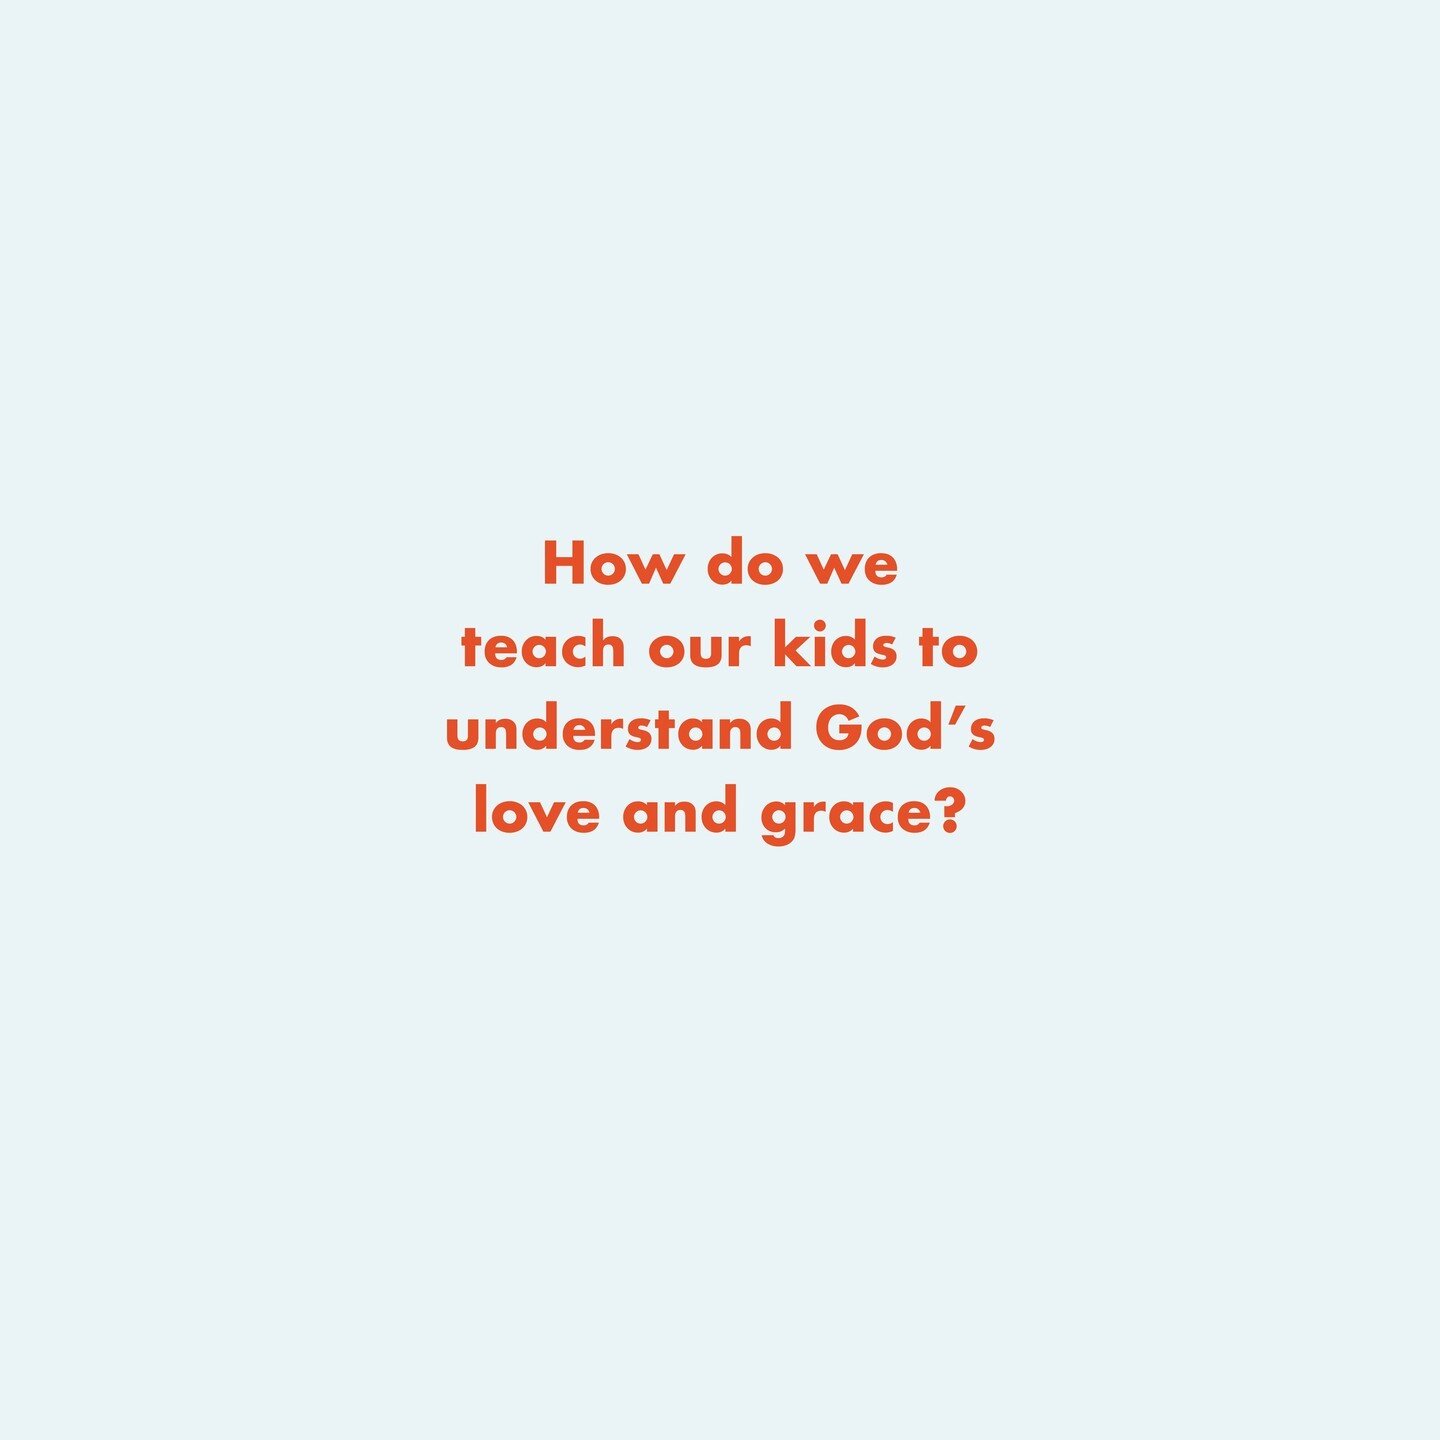 Sometimes we want our kids to understand God&rsquo;s love and grace so badly that we overcomplicate it.

But when Jesus was asked what the most important commandment was, he replied with one simple phrase: &ldquo;love the Lord your God with all your 